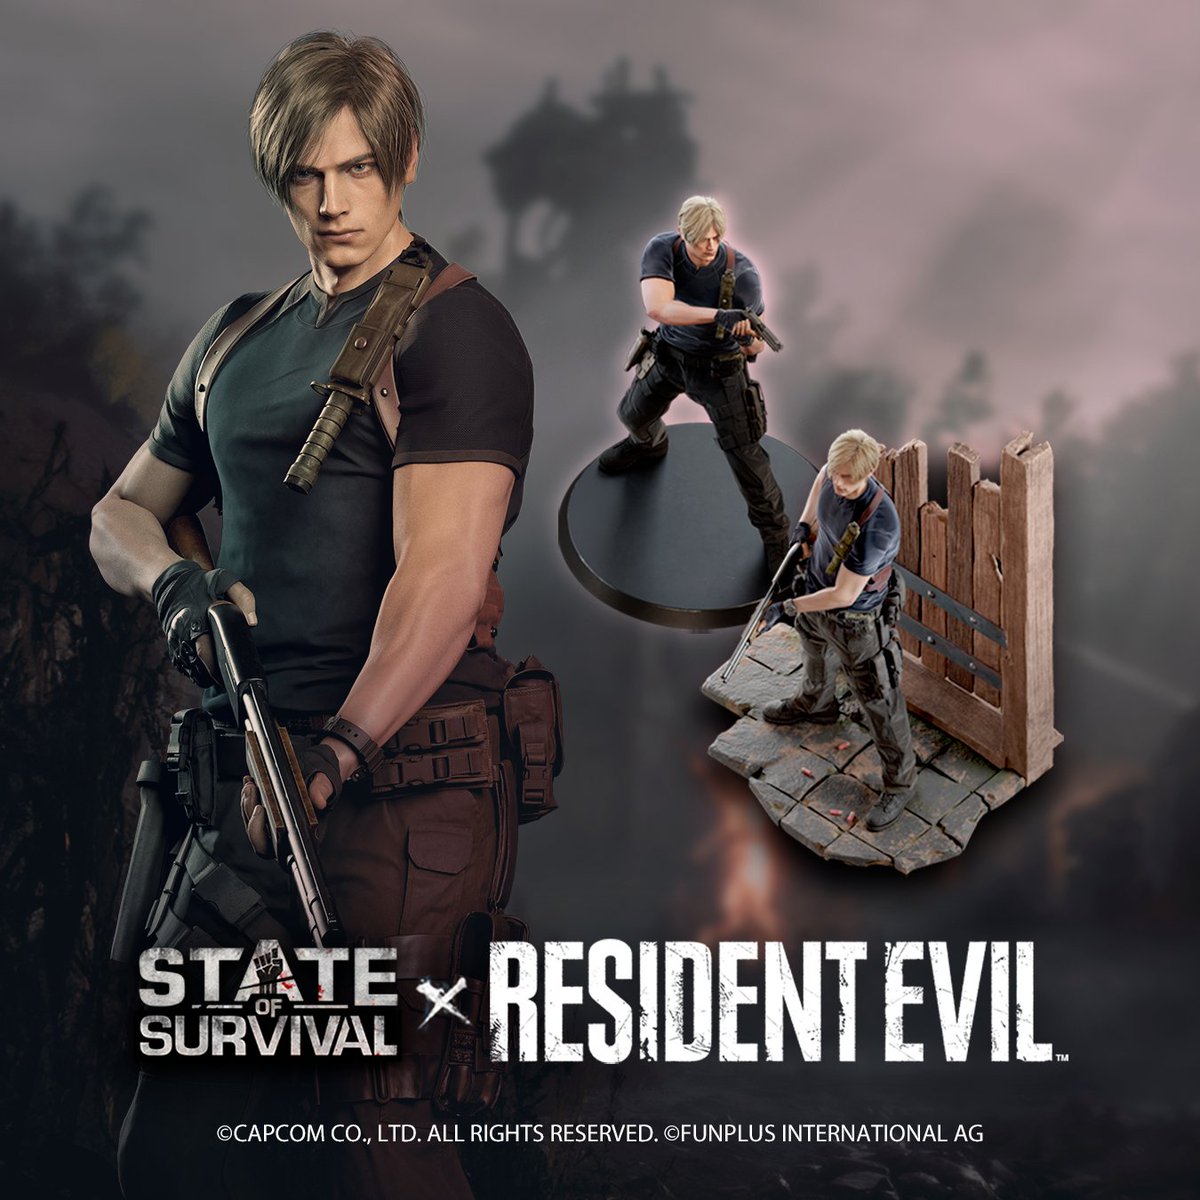 🔪State of Survival x Resident Evil 4 From Leon's days as a rookie cop to leading large-scale missions, few know the truth about his past. Follow @state_survival + repost this Tweet, we will pick a lucky winner to send the exclusive crossover Leon - Shooting Stance Statue.